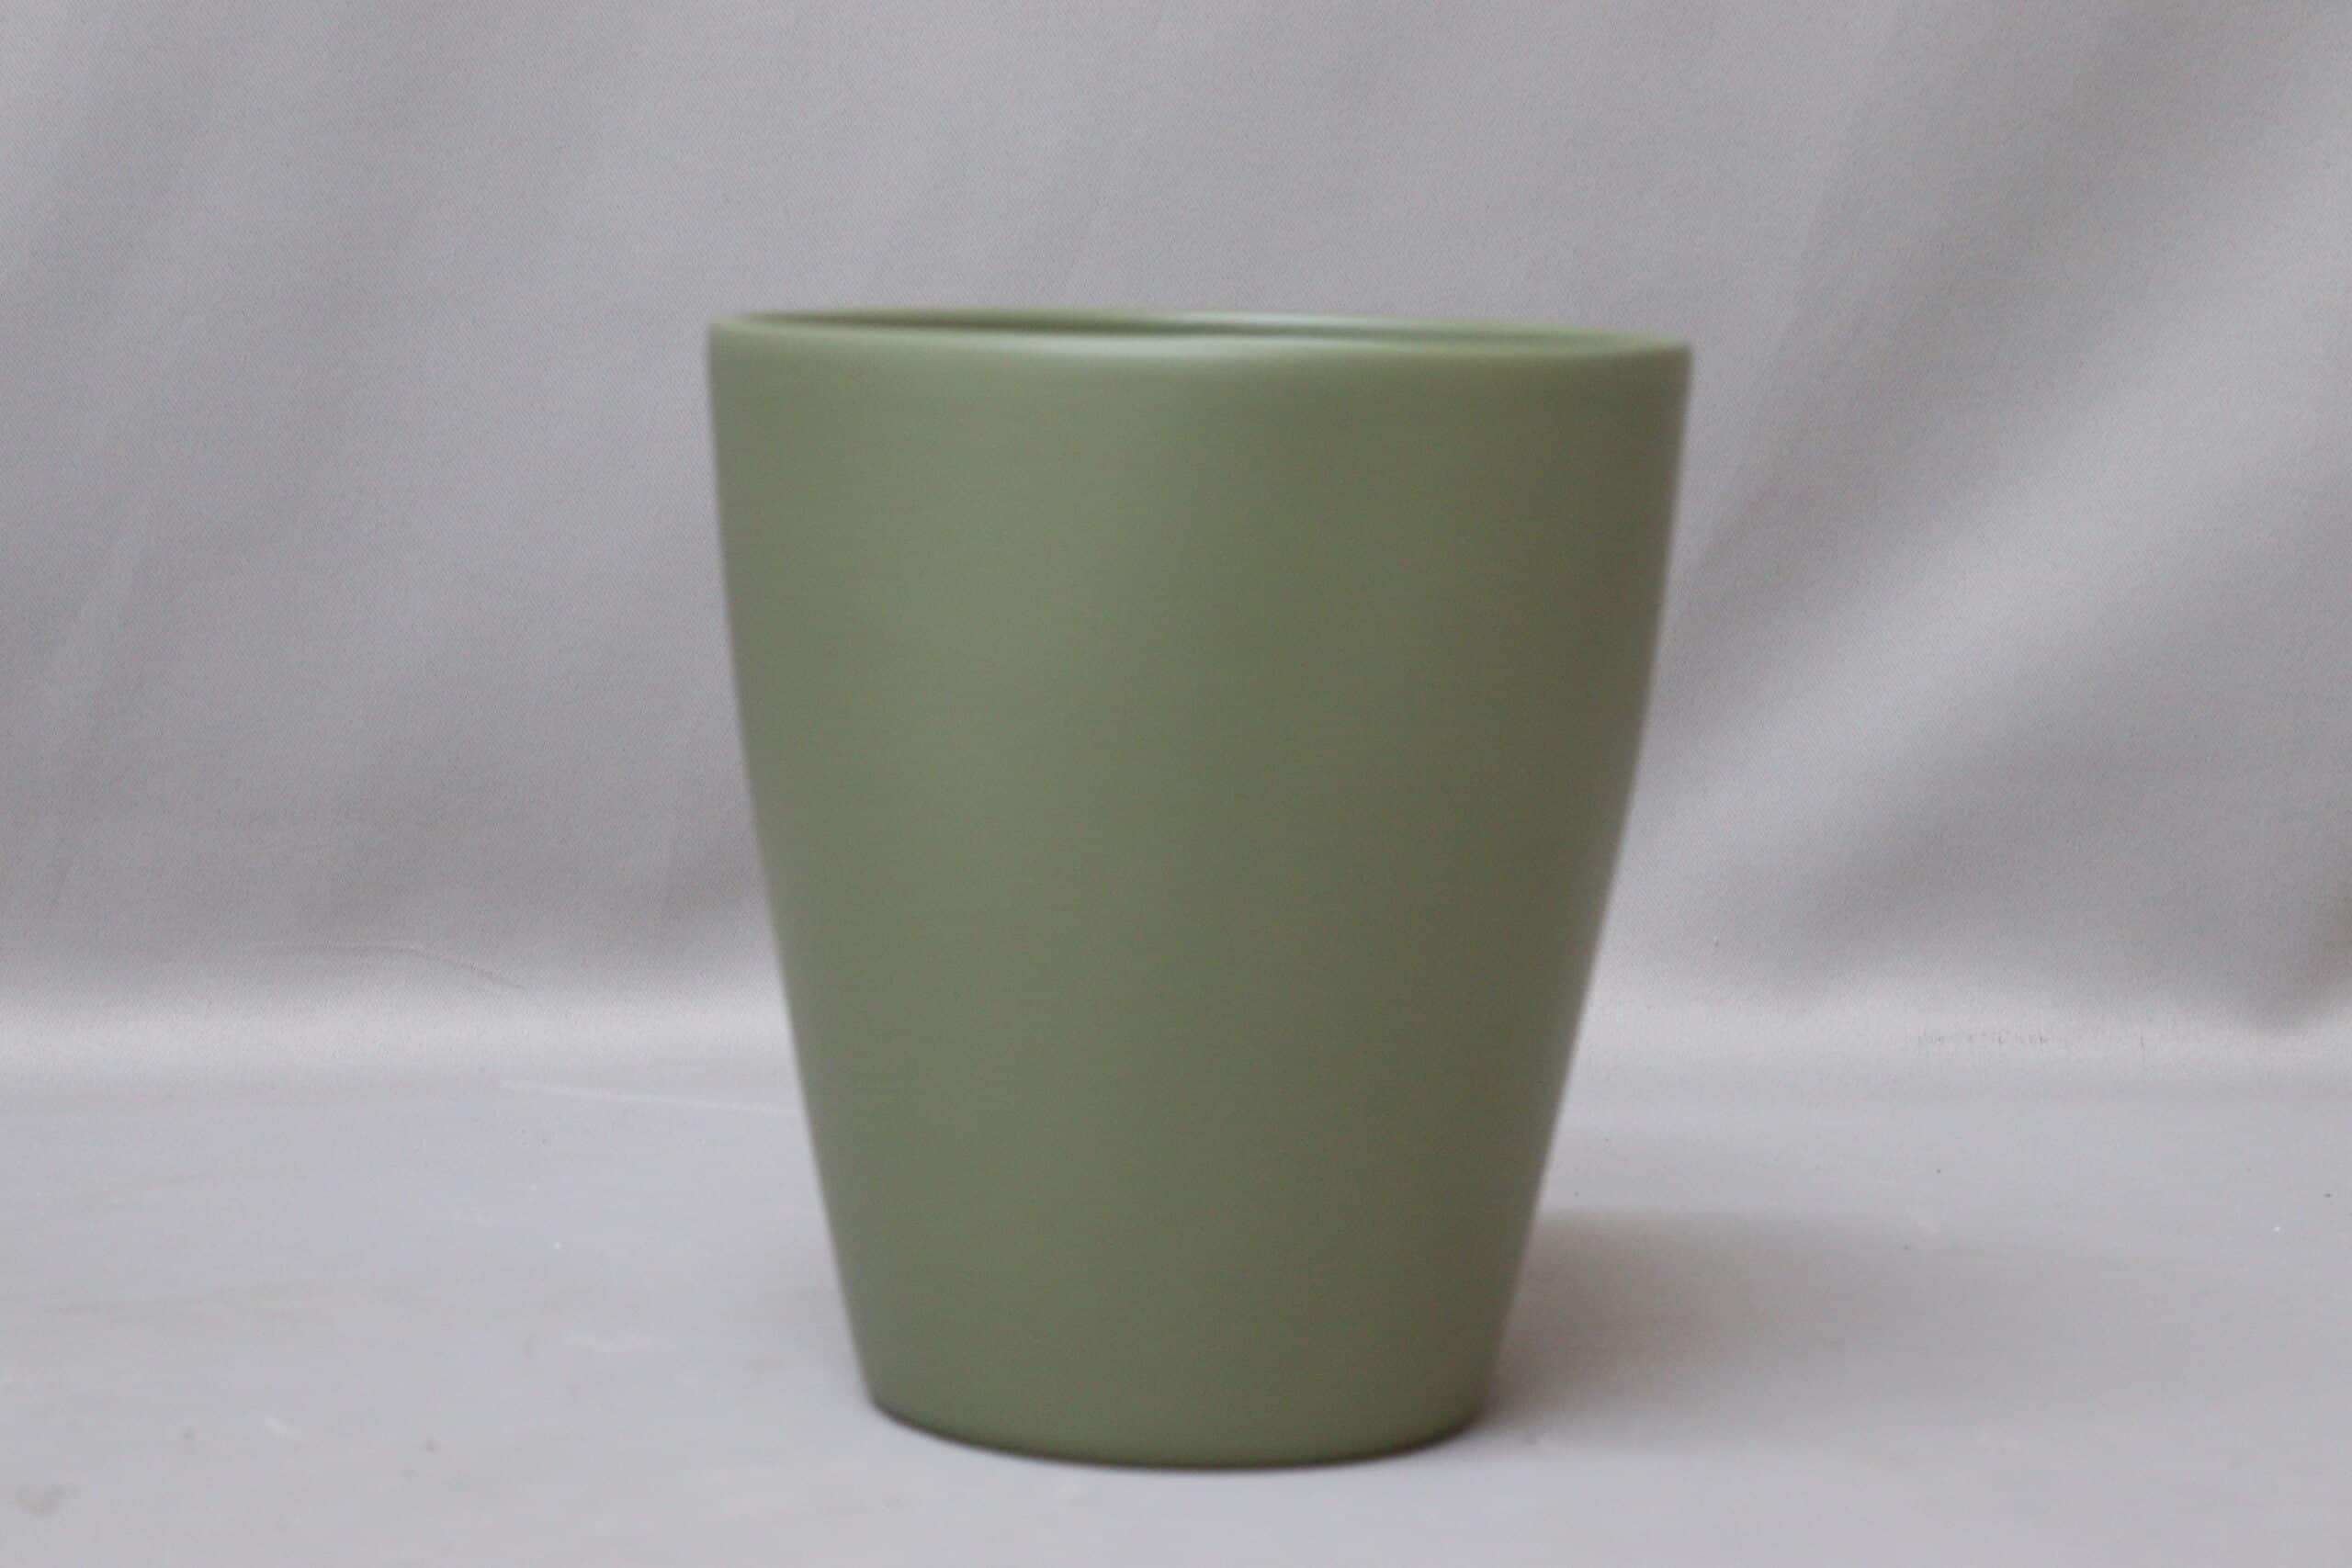 Smooth bottle green pot cover for potted plants.